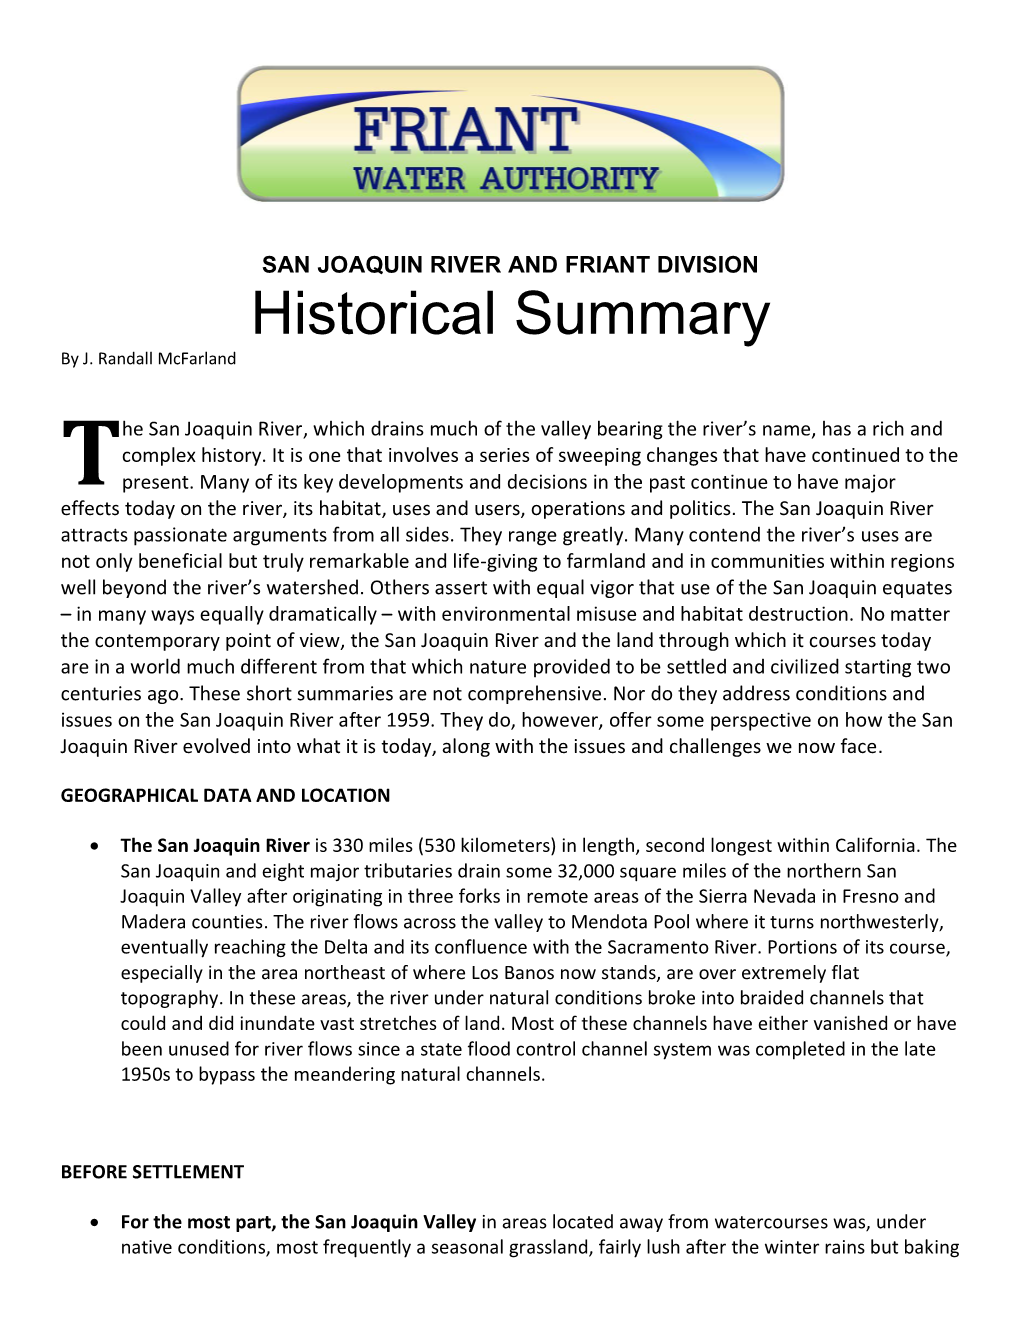 Historical Summary by J